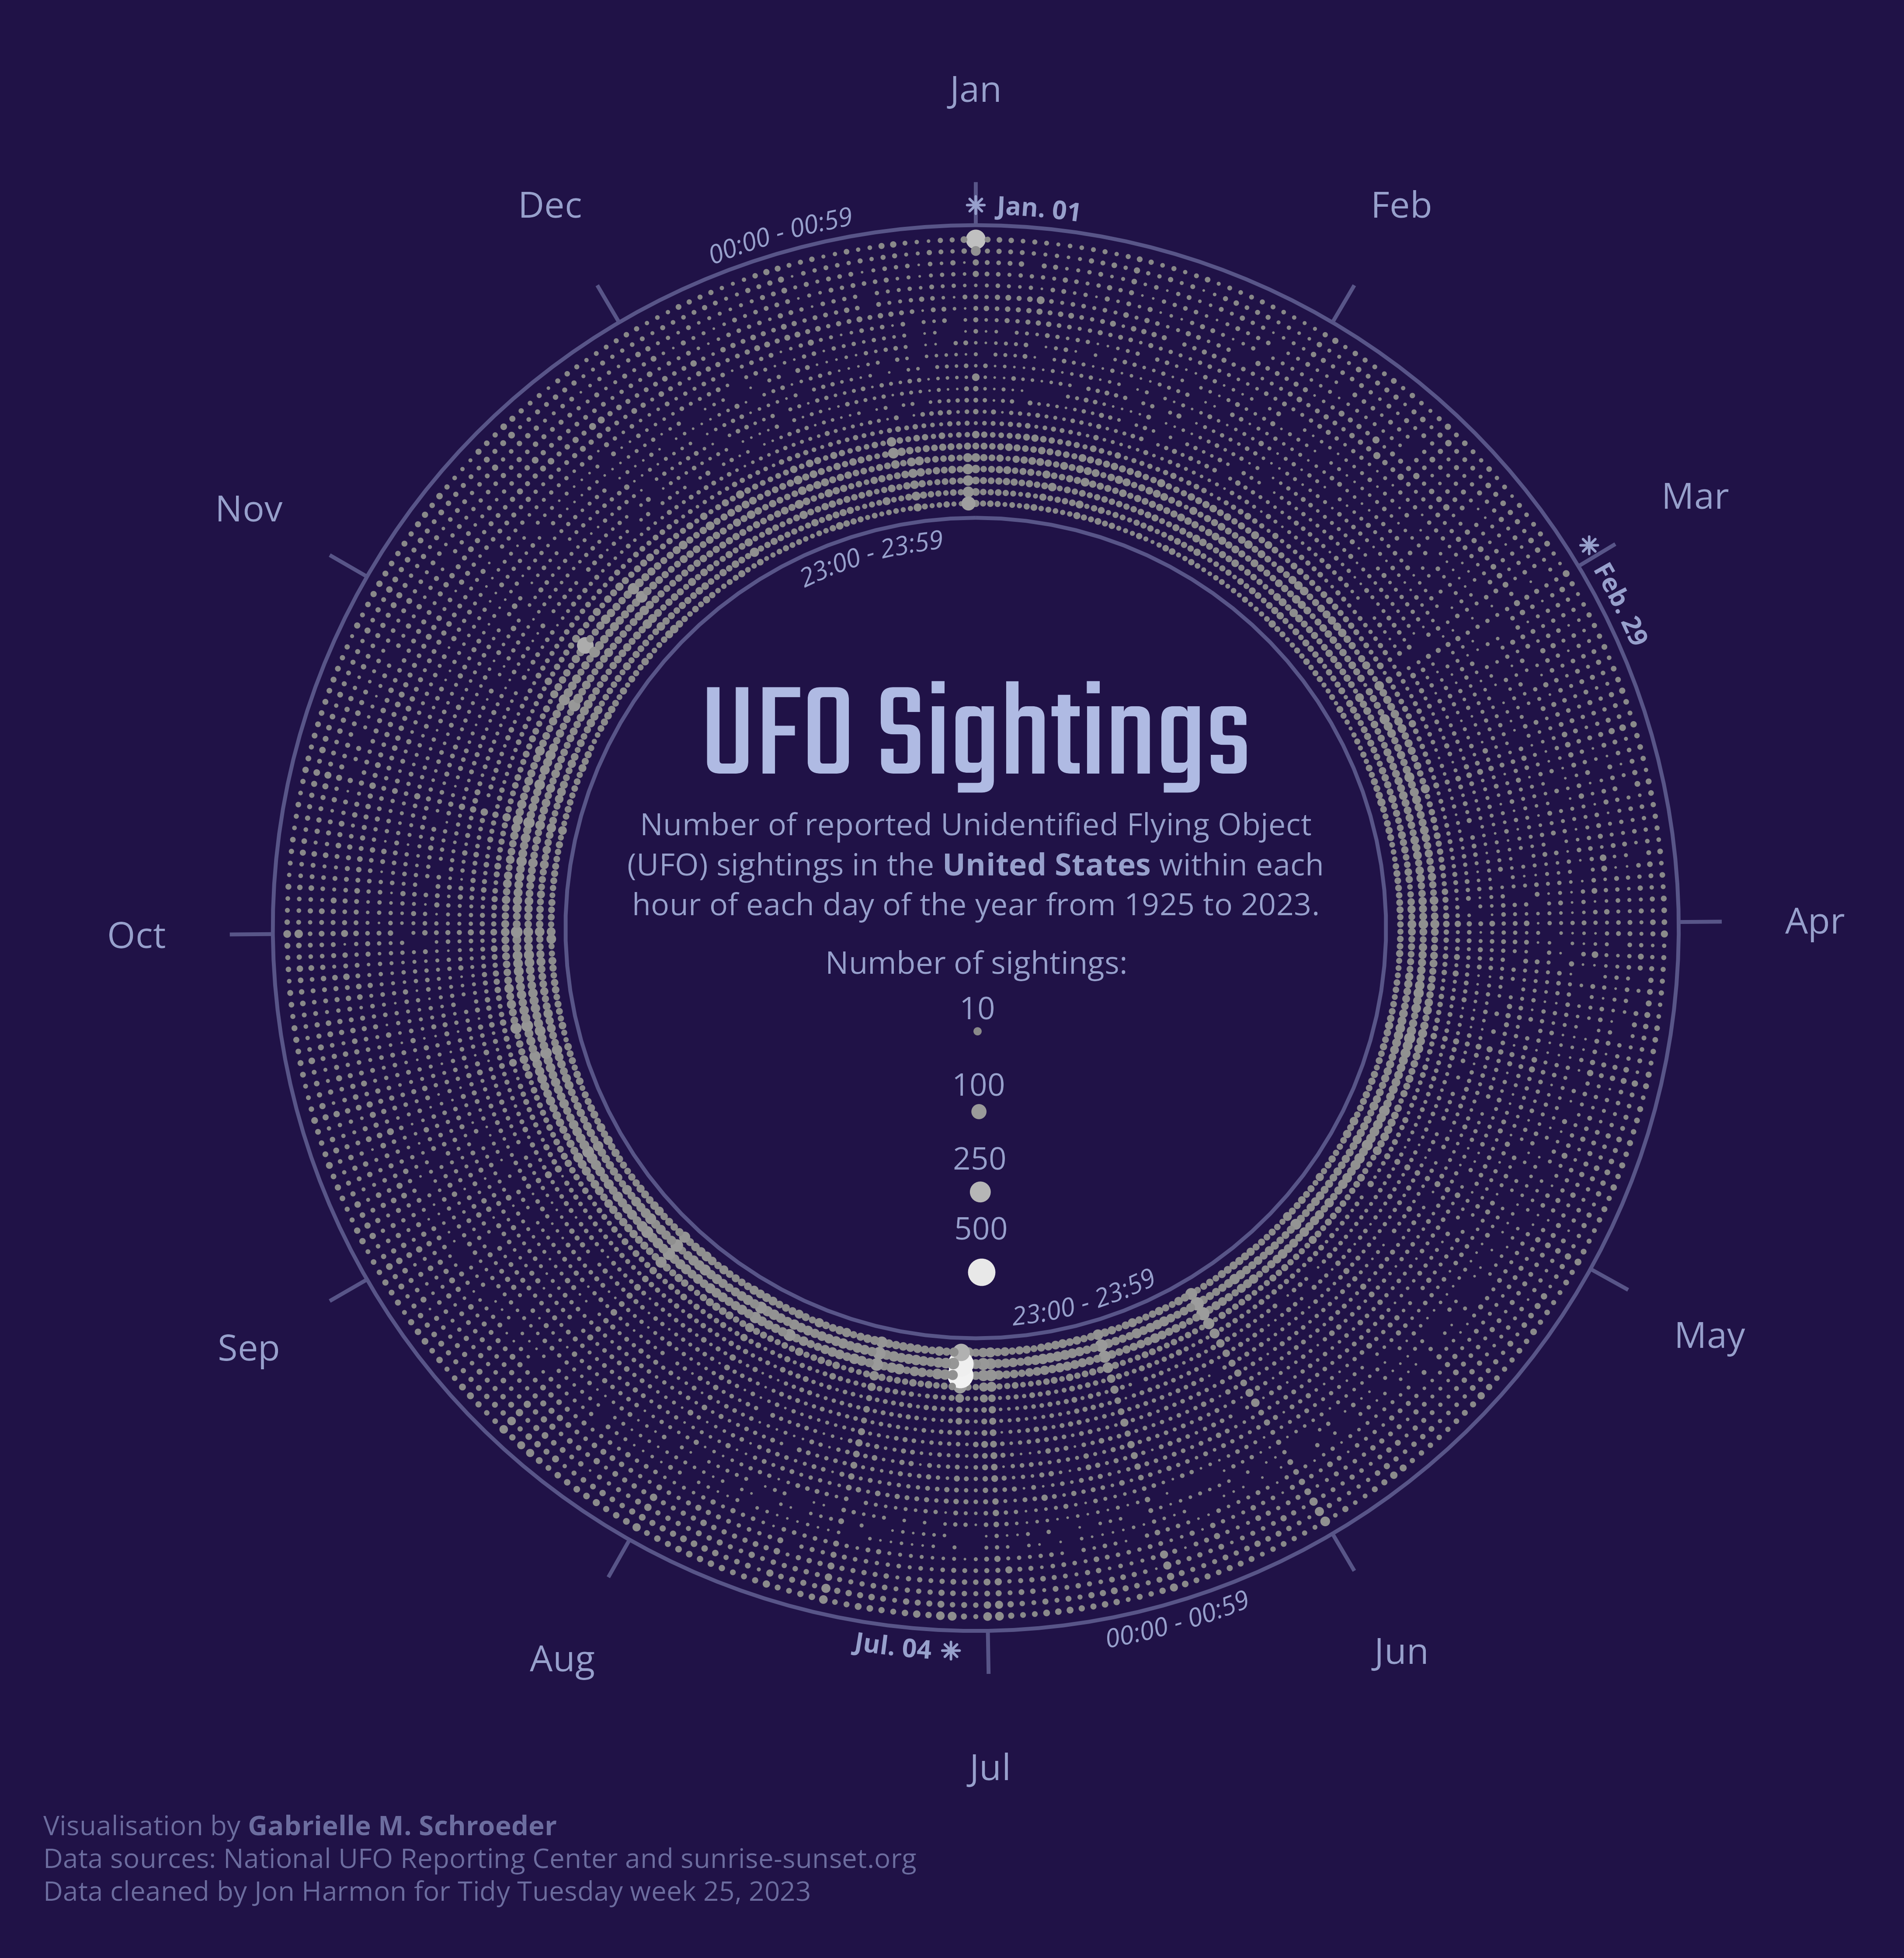 Bubble chart of the number of UFO sightings, shown by point size, in the United States during each hour of each day in the calendar year. Polar coordinates are used to place the days of the year on a circle, creating a donut shape. Sightings are more frequent during the last few hours (during summer) or several hours (during winter) of the day, and sightings are especially common on Jan. 1 and July 4.